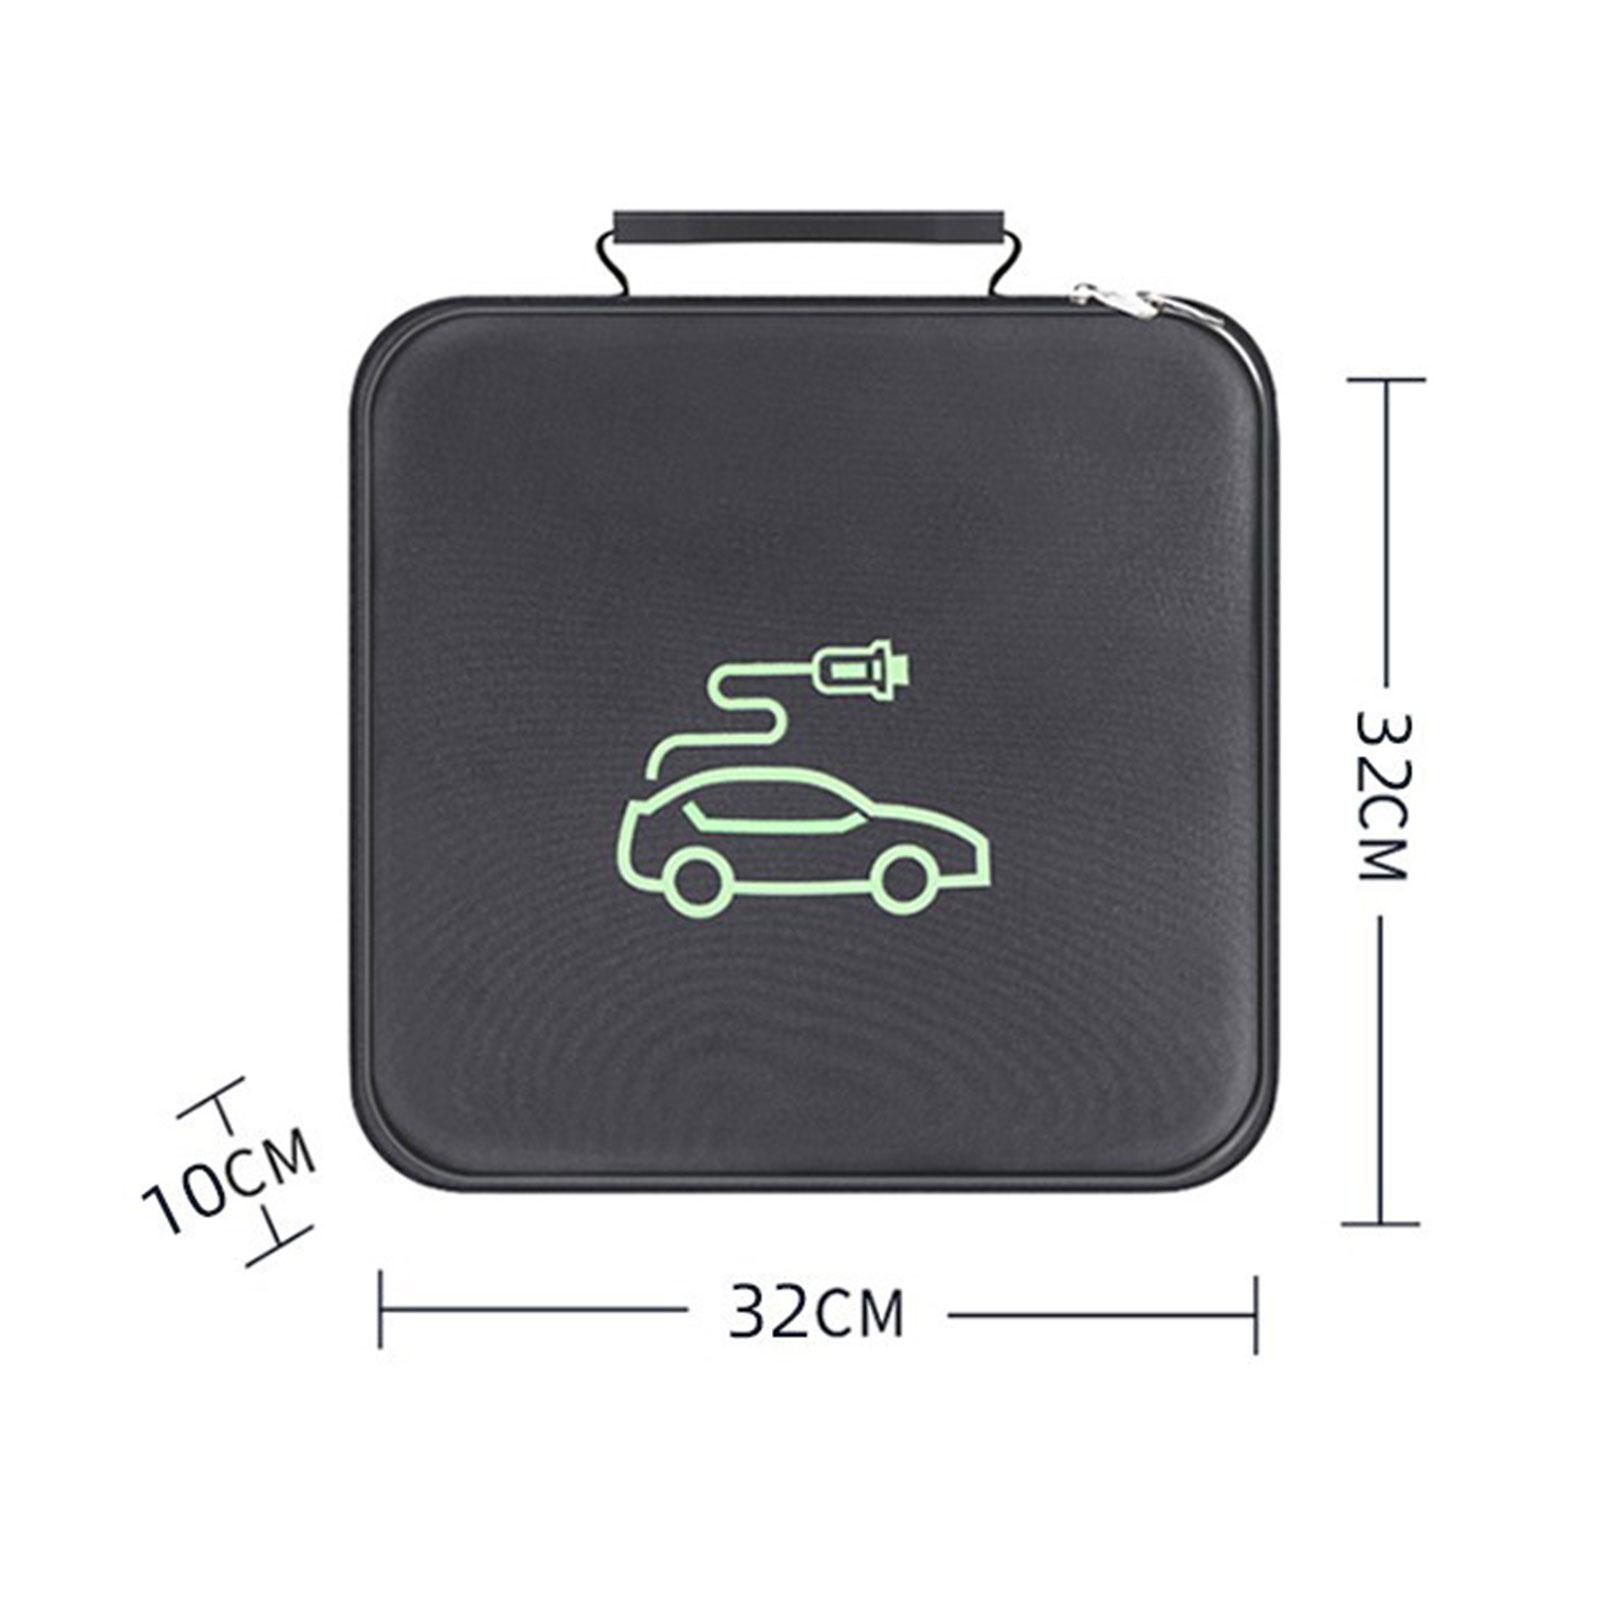 Waterproof EV Cables Bag Durable Cable Bag for Cable Cords Hoses